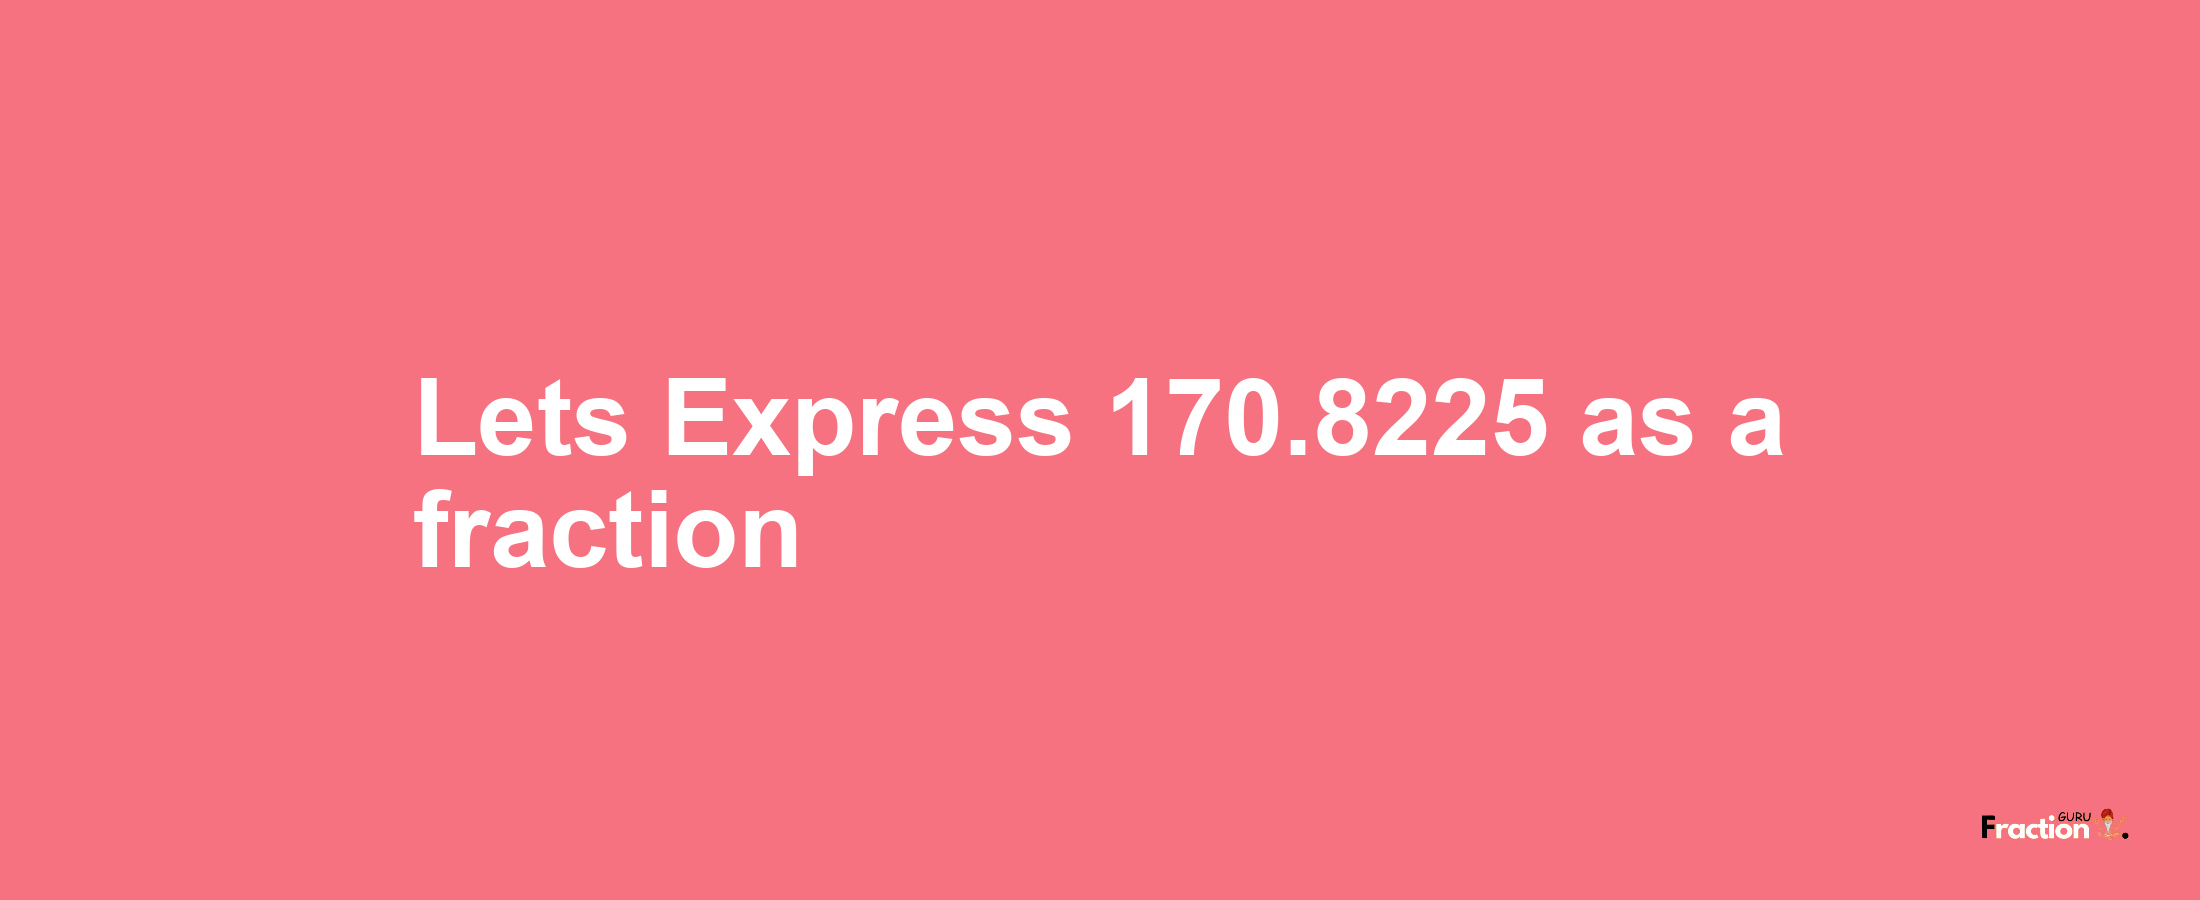 Lets Express 170.8225 as afraction